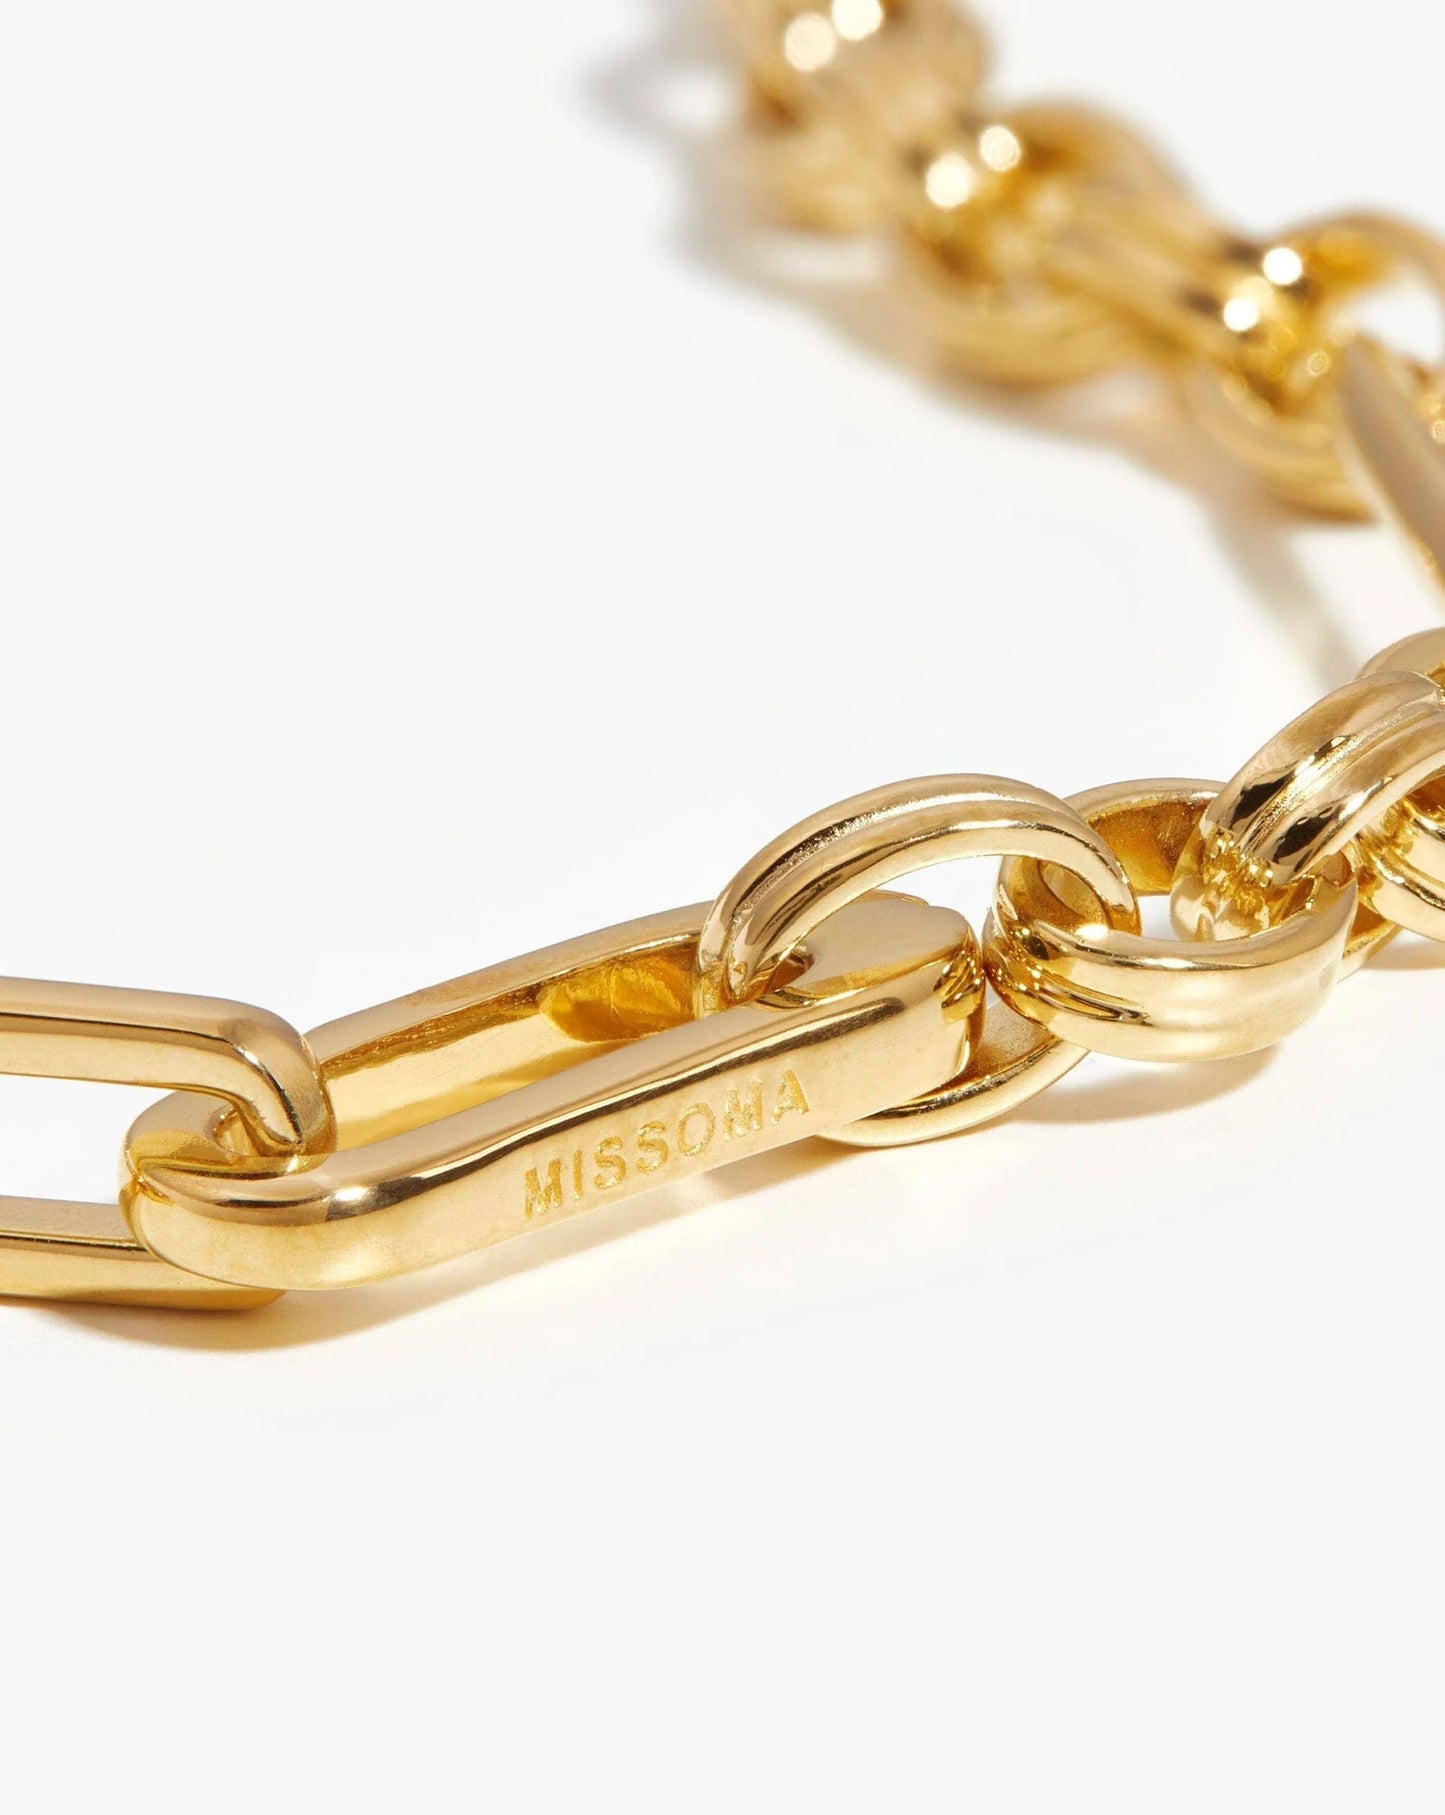 Gold Axiom Chain Necklace Gold Plated